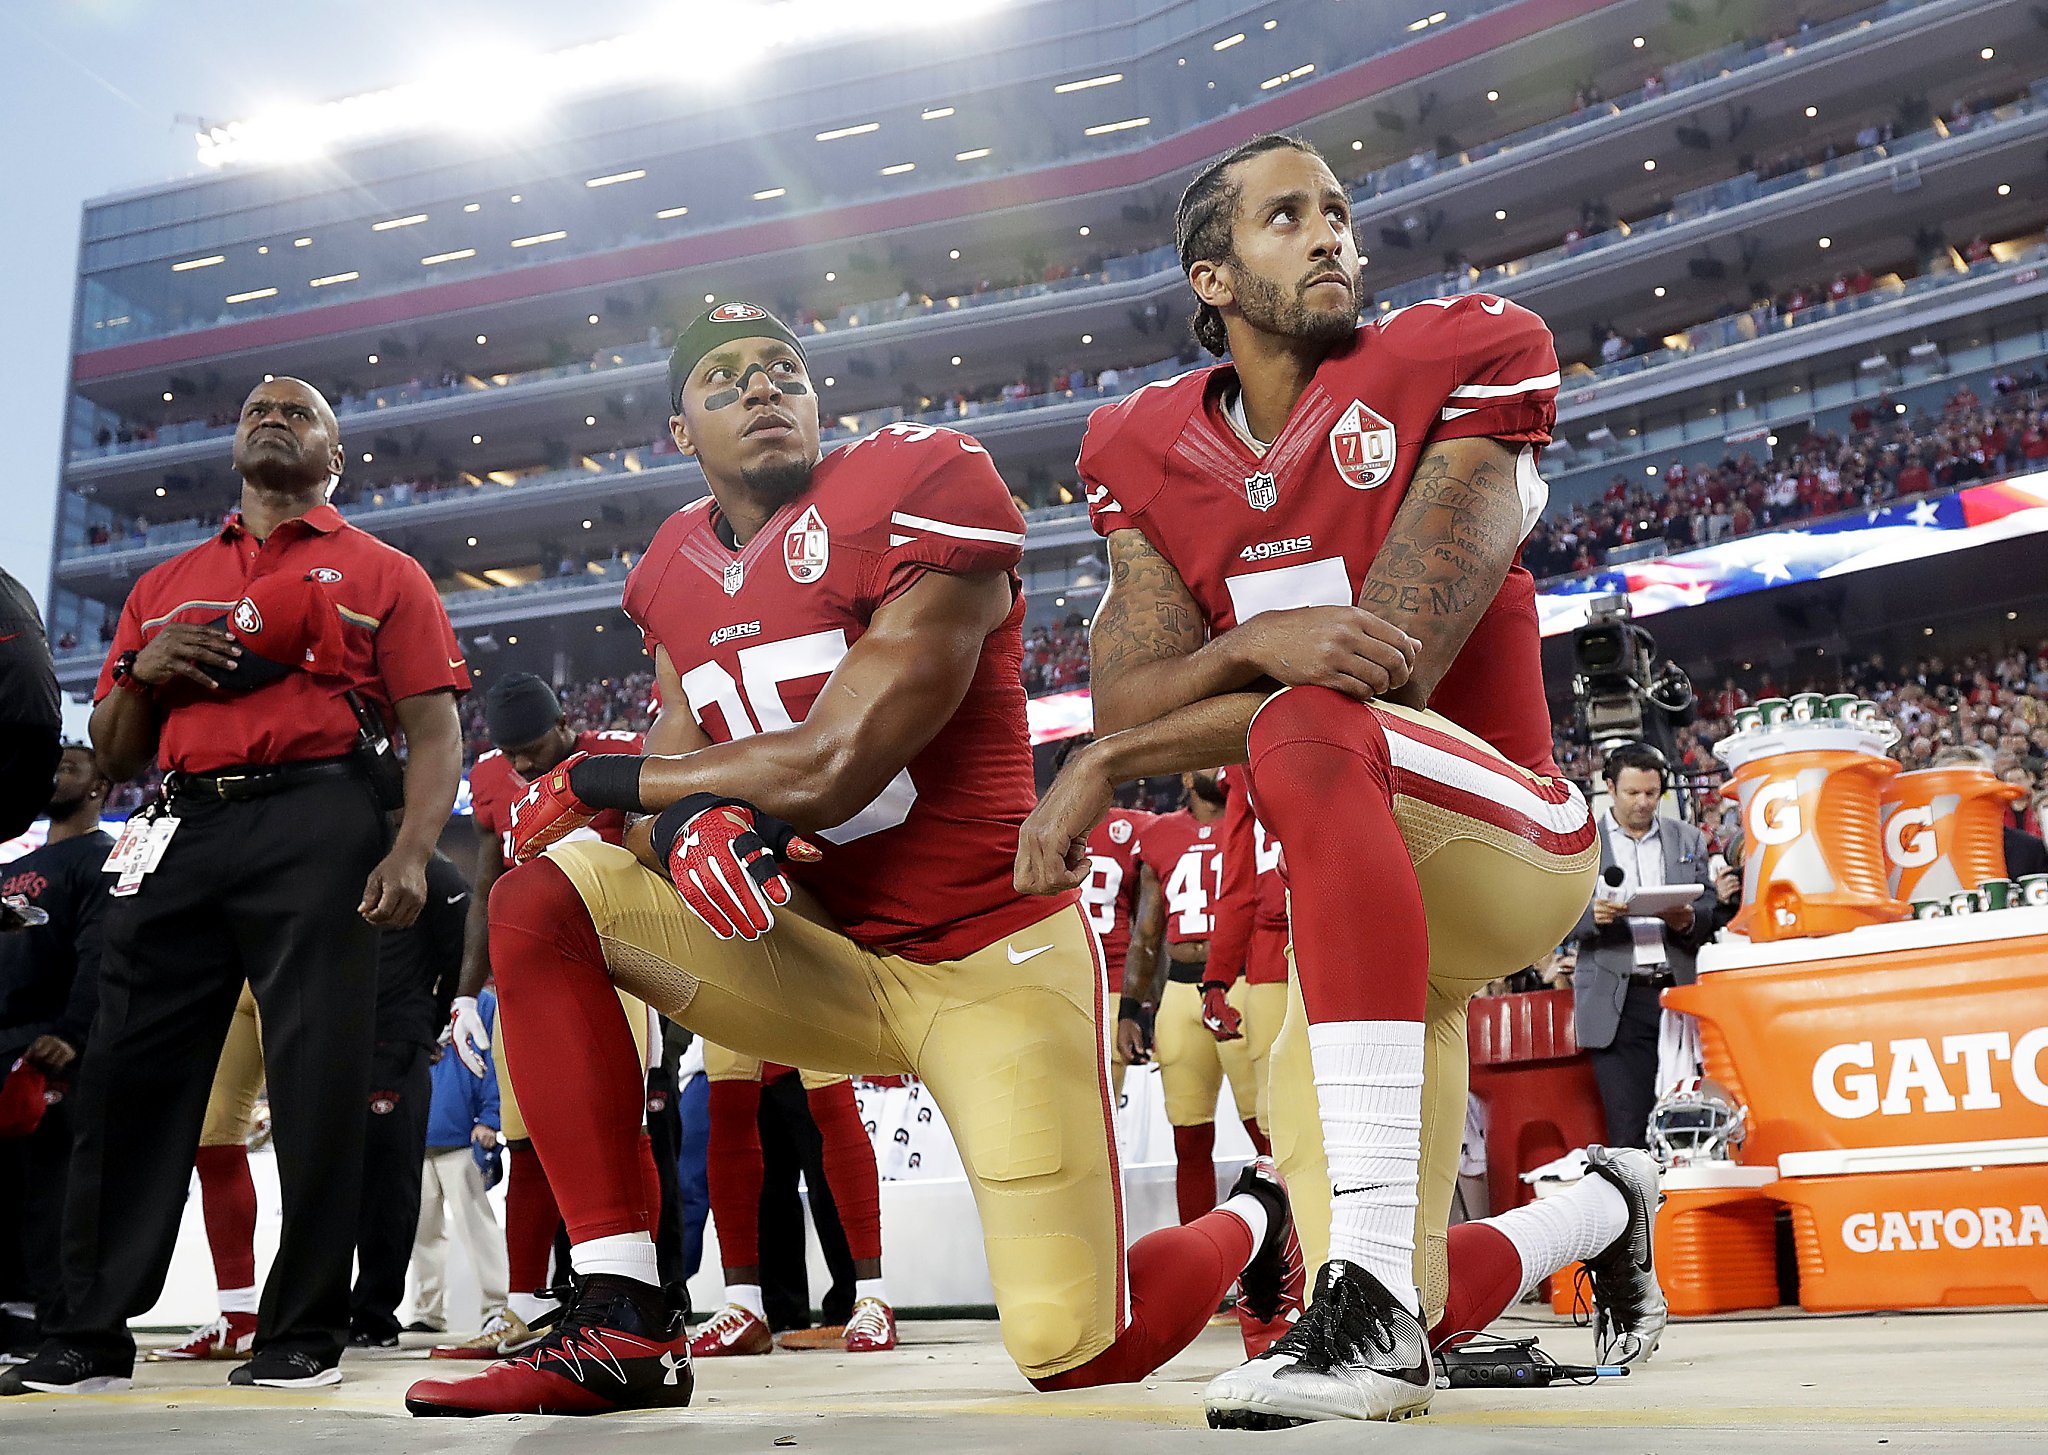 No way Colin Kaepernick is talented enough to lead an NFL team